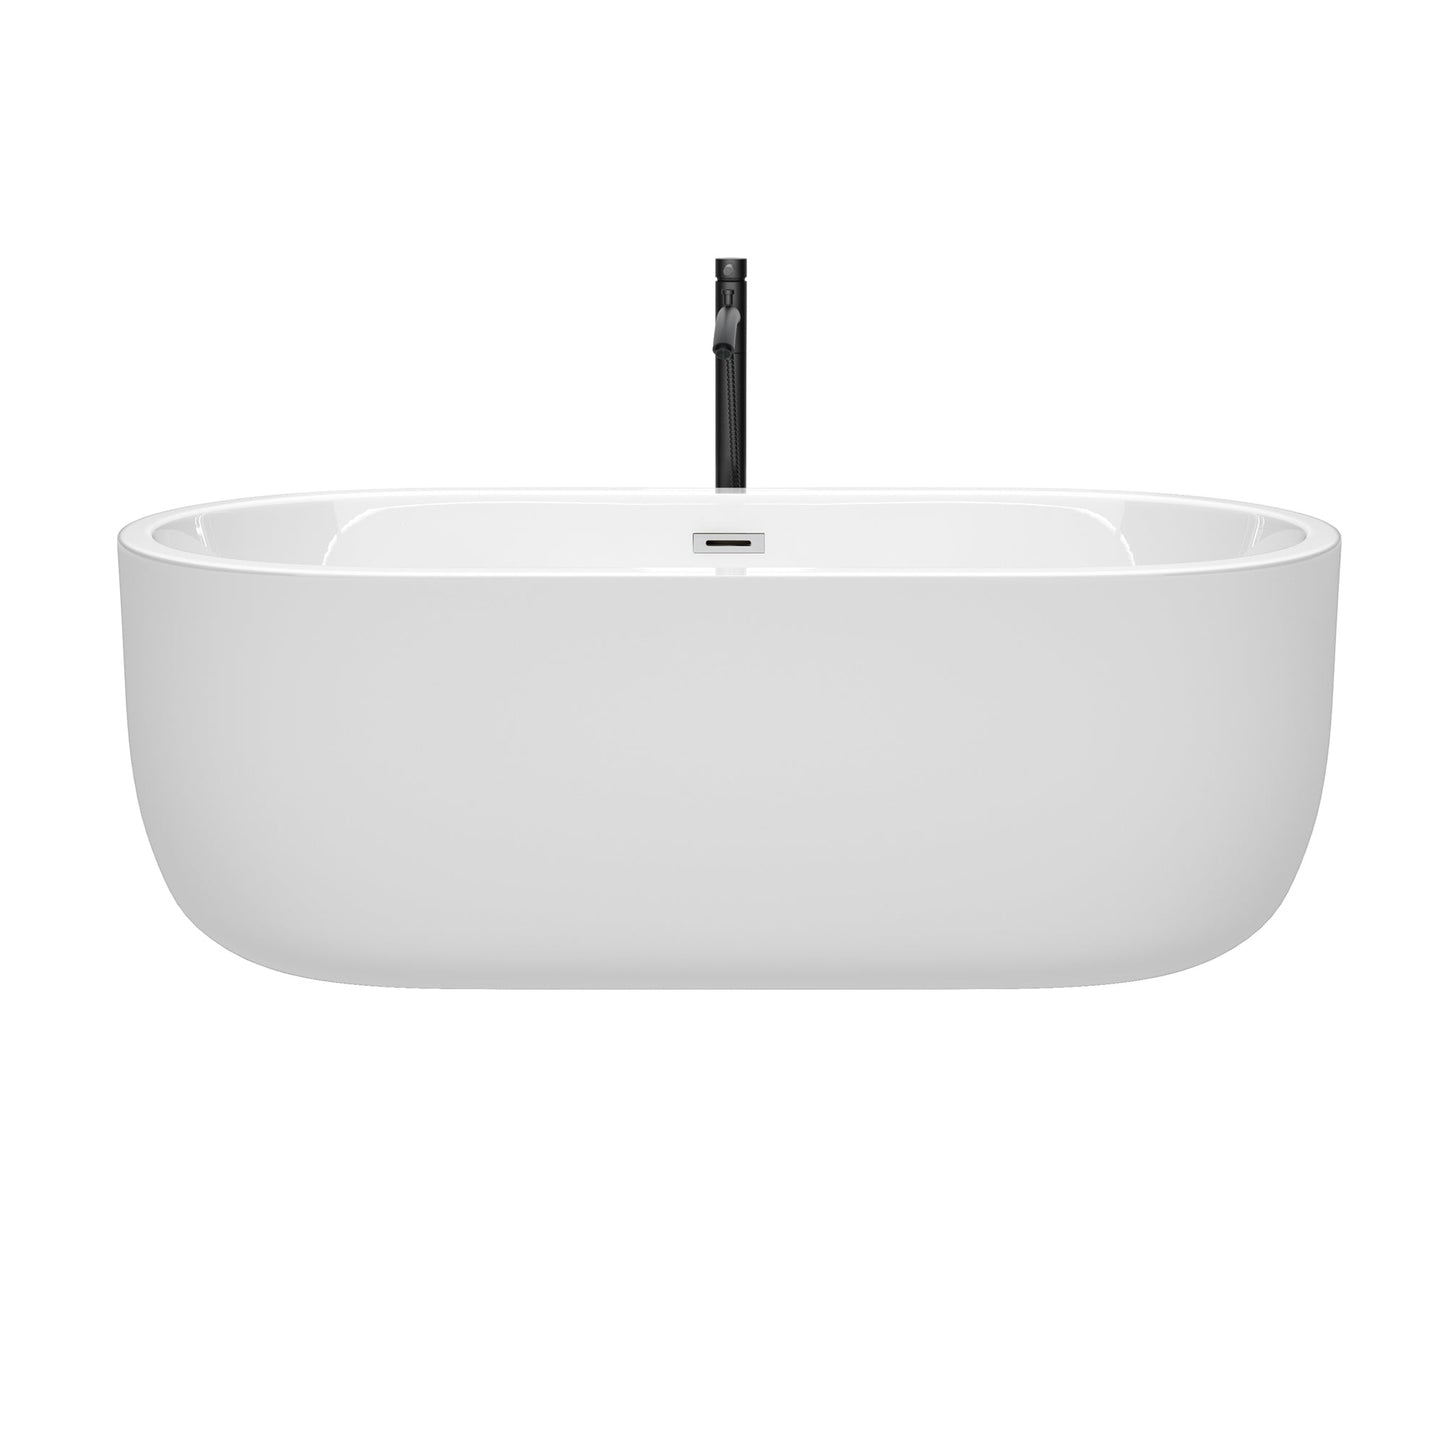 Wyndham Collection Juliette 67" Freestanding Bathtub in White With Polished Chrome Trim and Floor Mounted Faucet in Matte Black